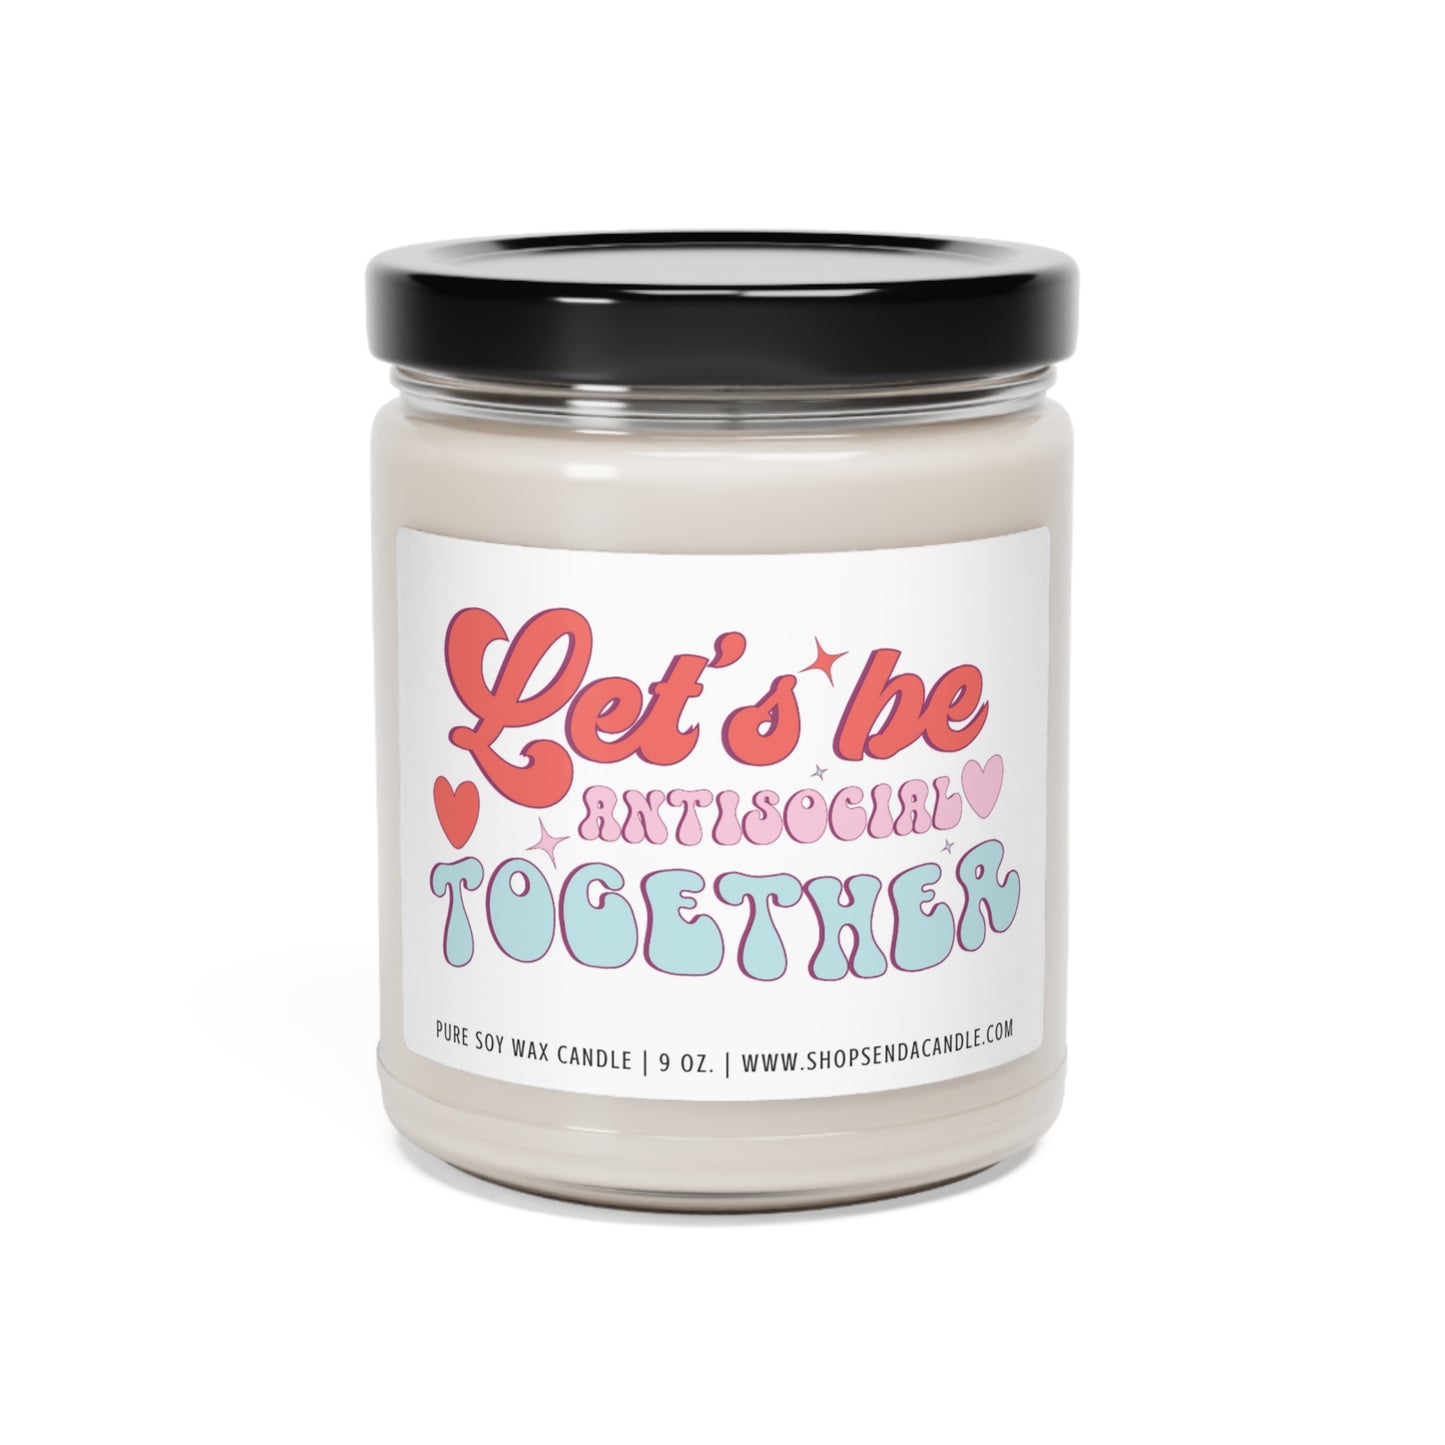 Valentines Day Gift For A Friend | Send A Candle